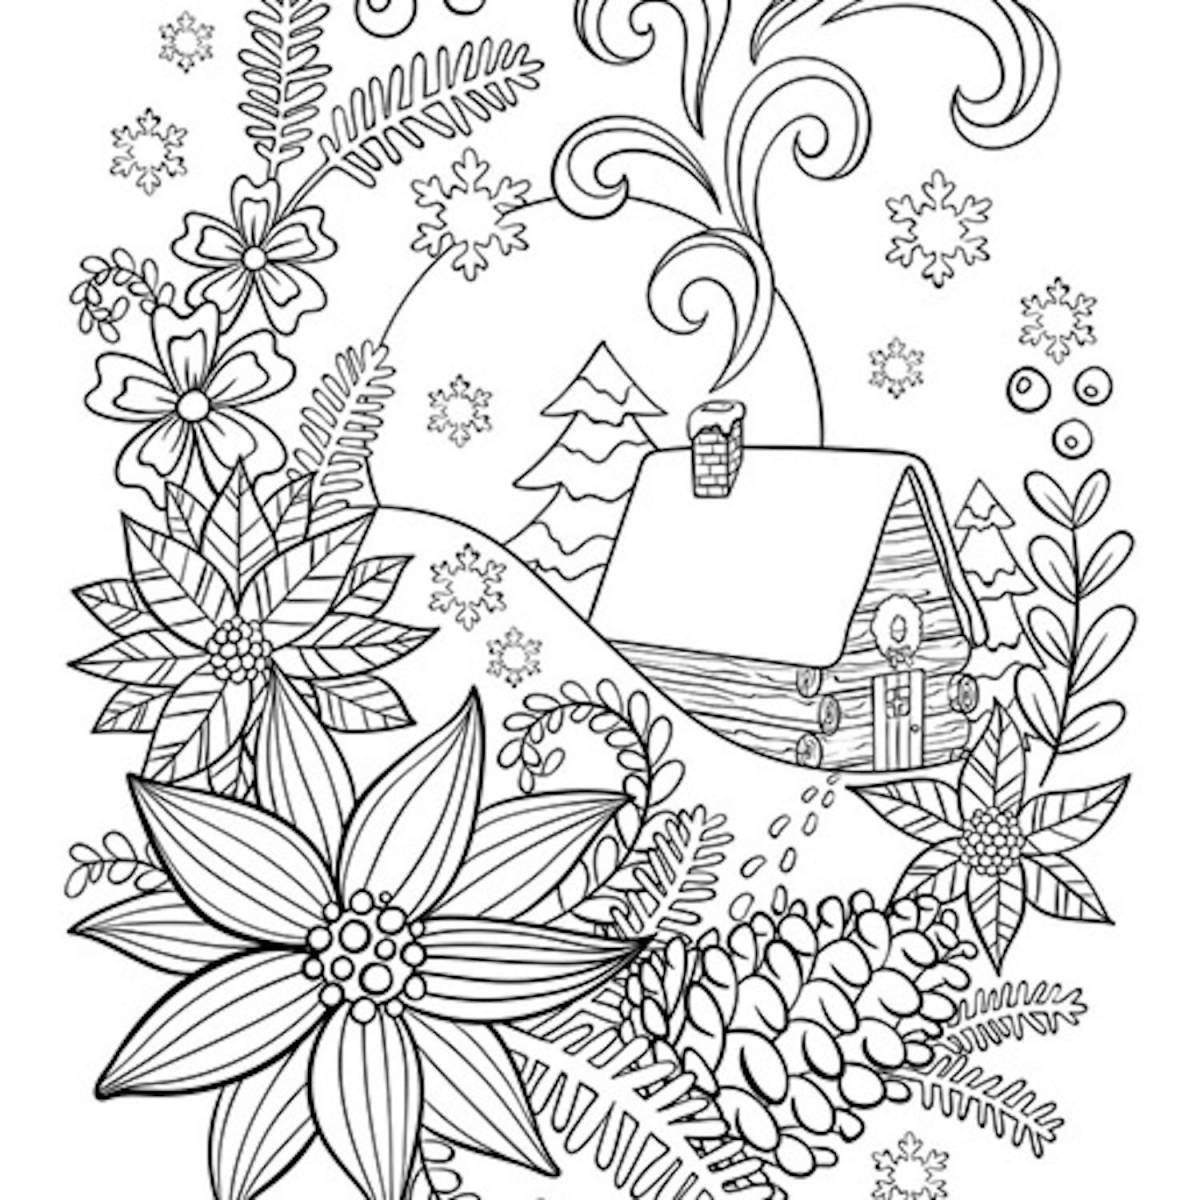 Exquisite winter coloring book for adults